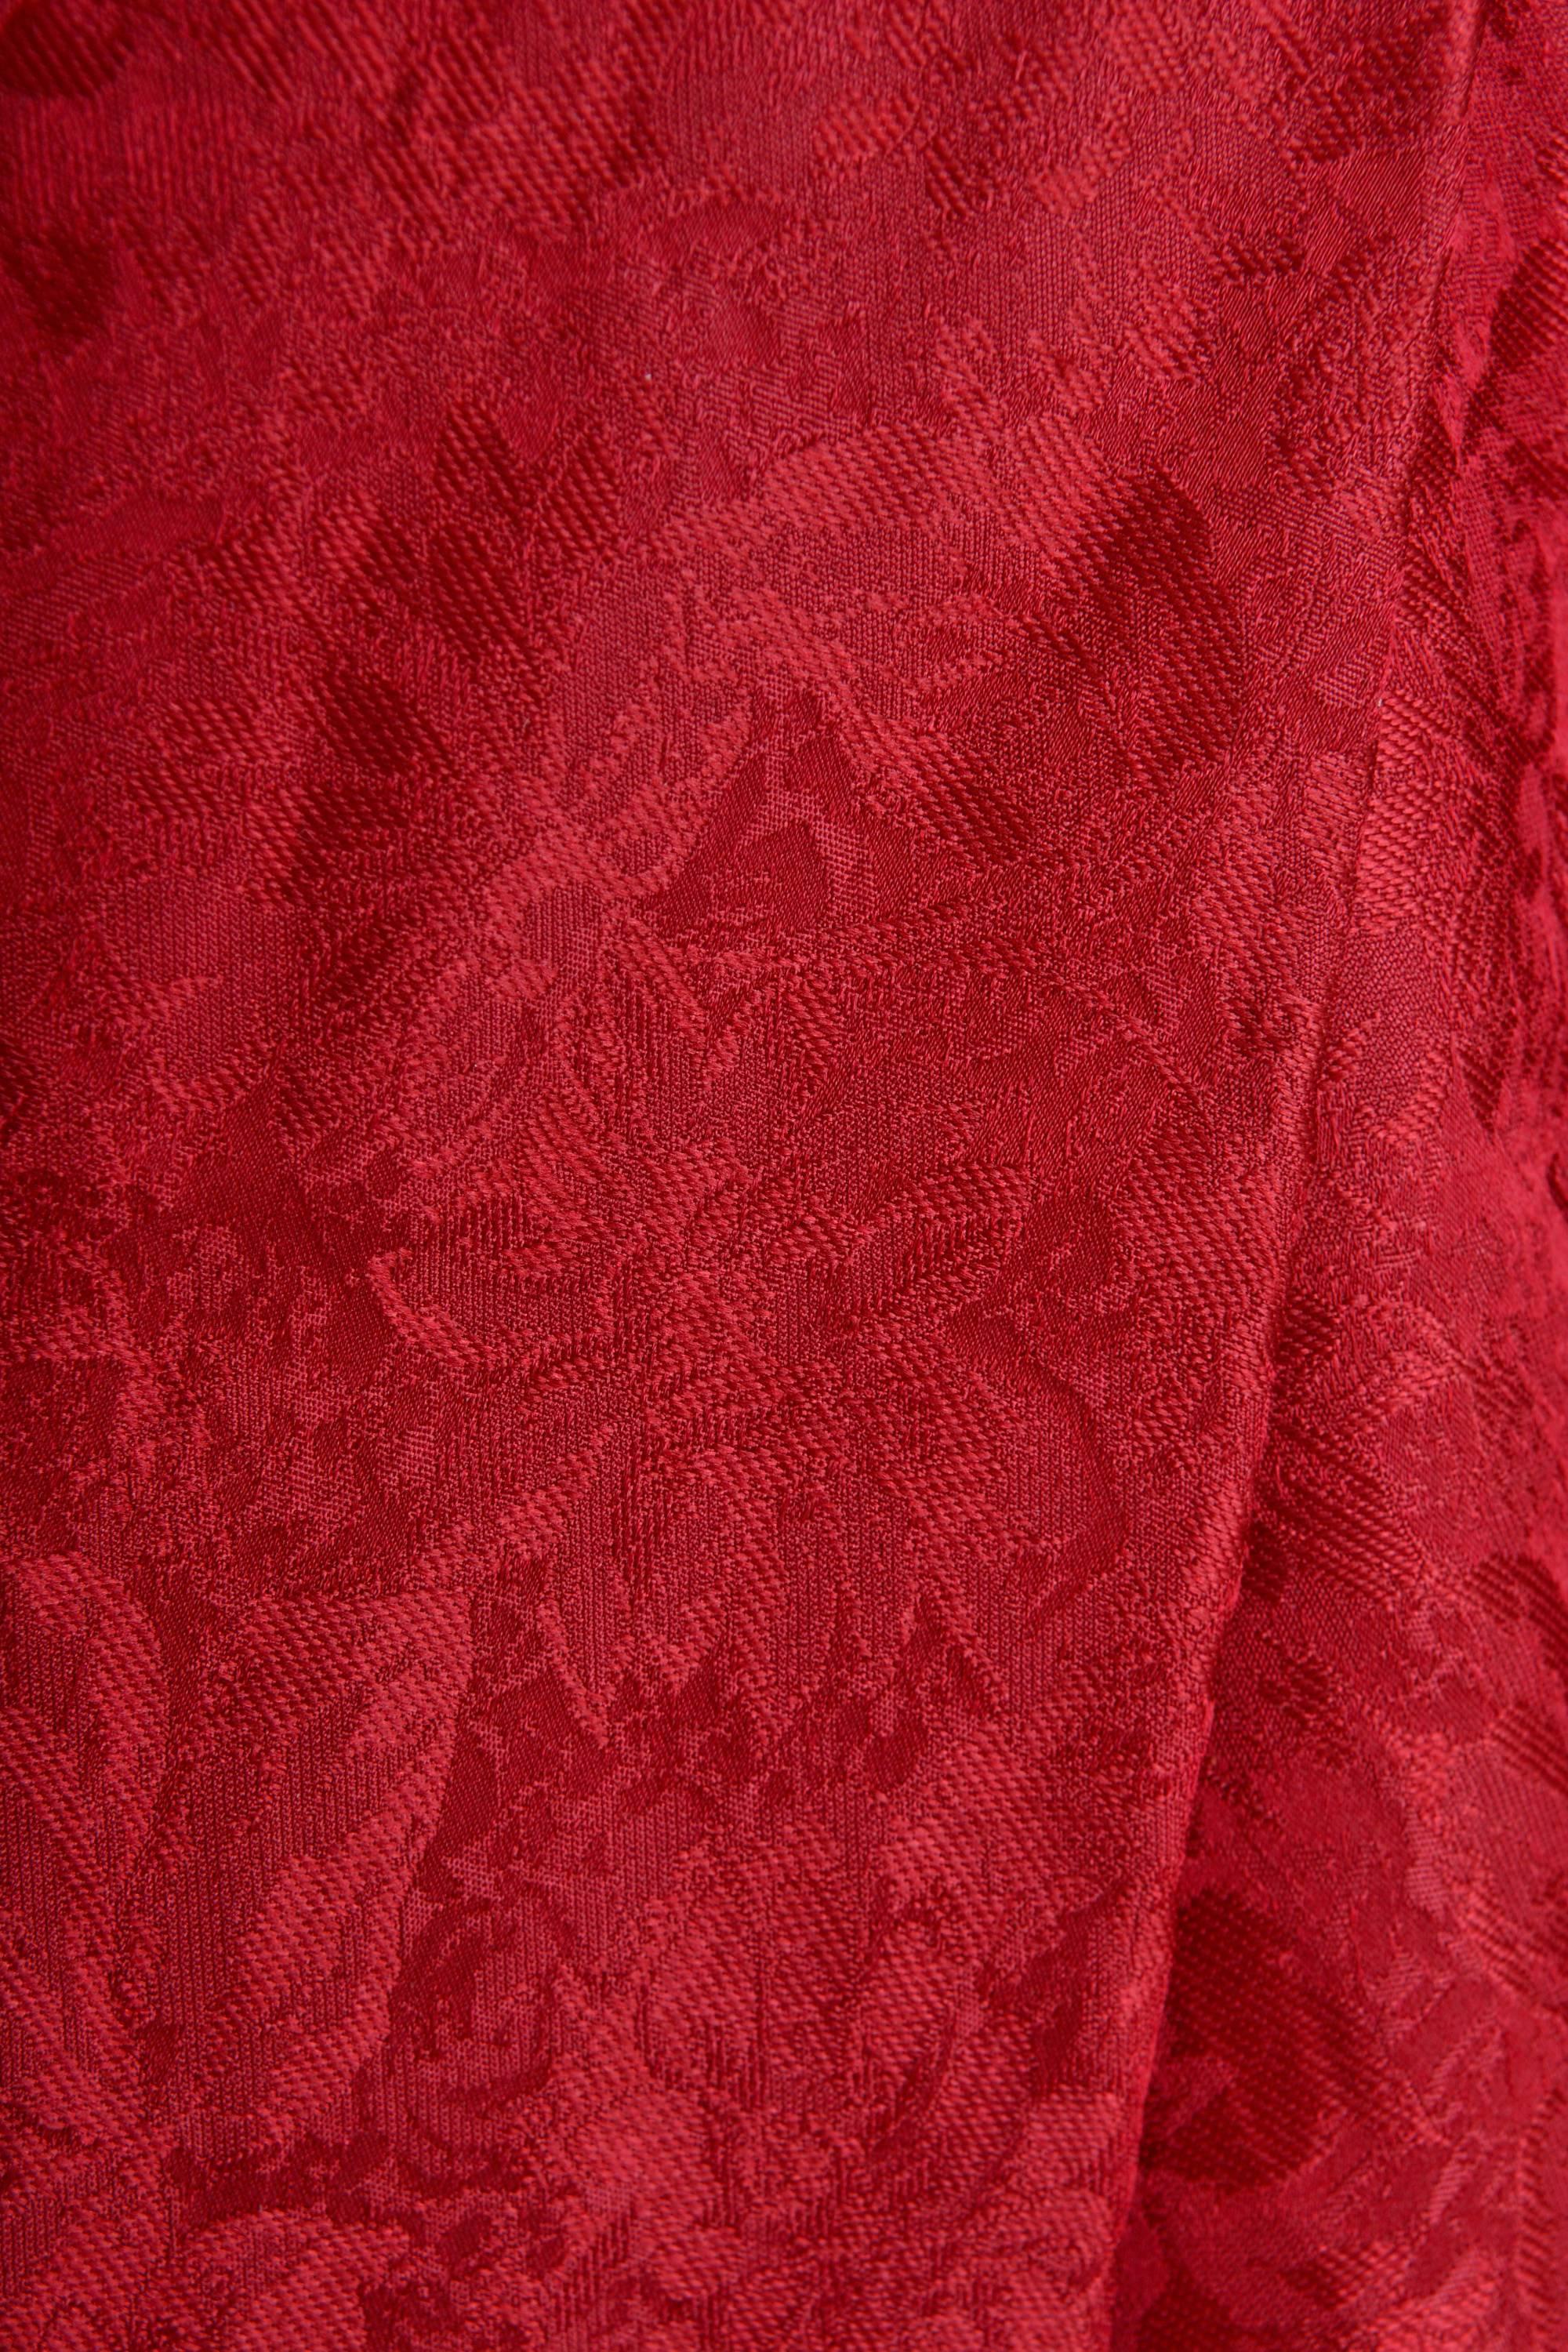 Women's 1950s Italian Couture Burgundy Red Brocade Cocktail Dress